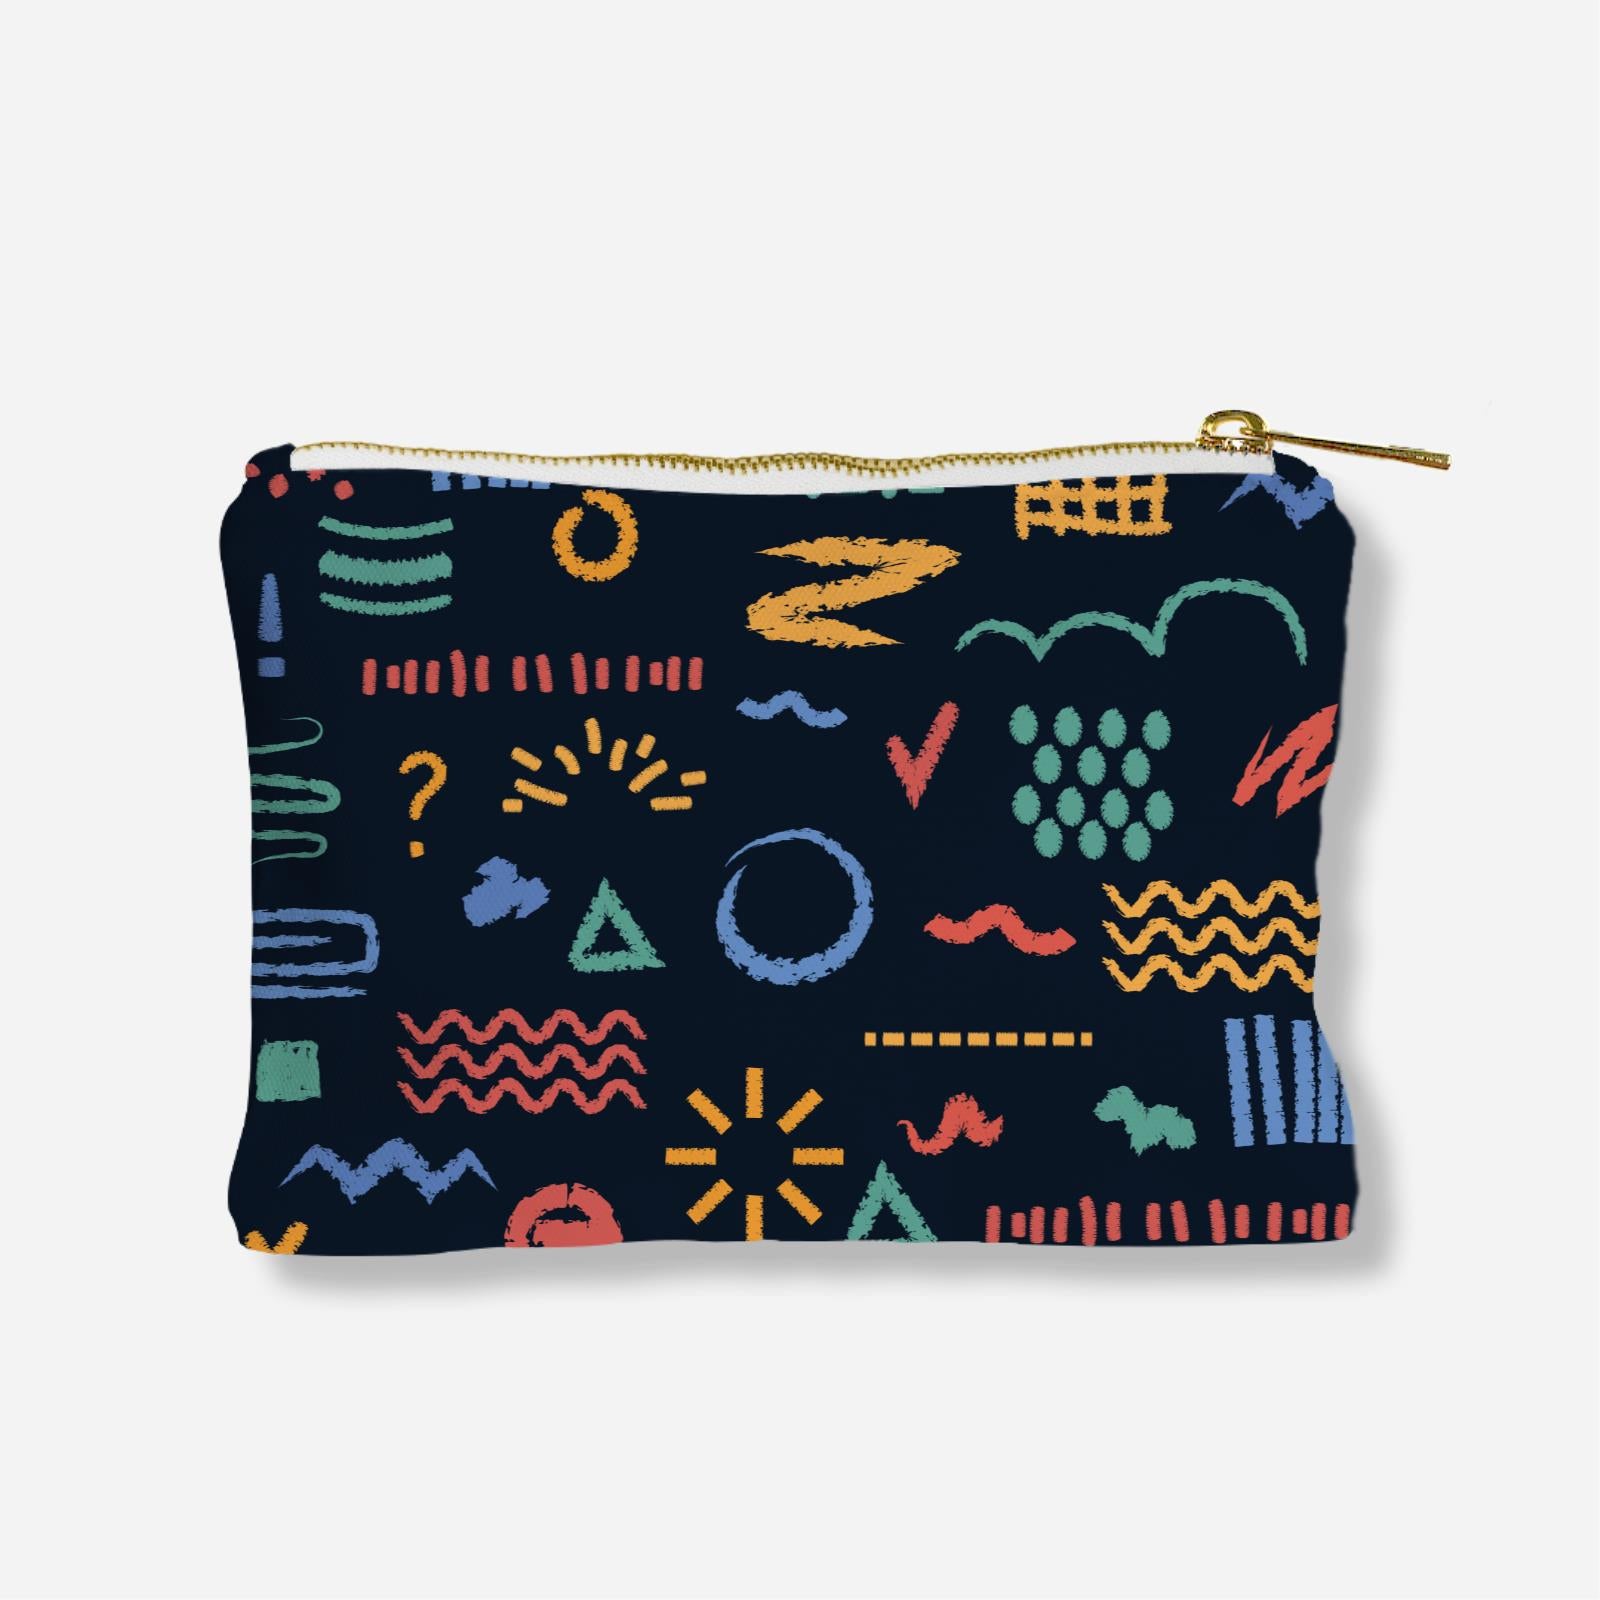 Be Confident Series Zipper Pouch - If Not Now Then When